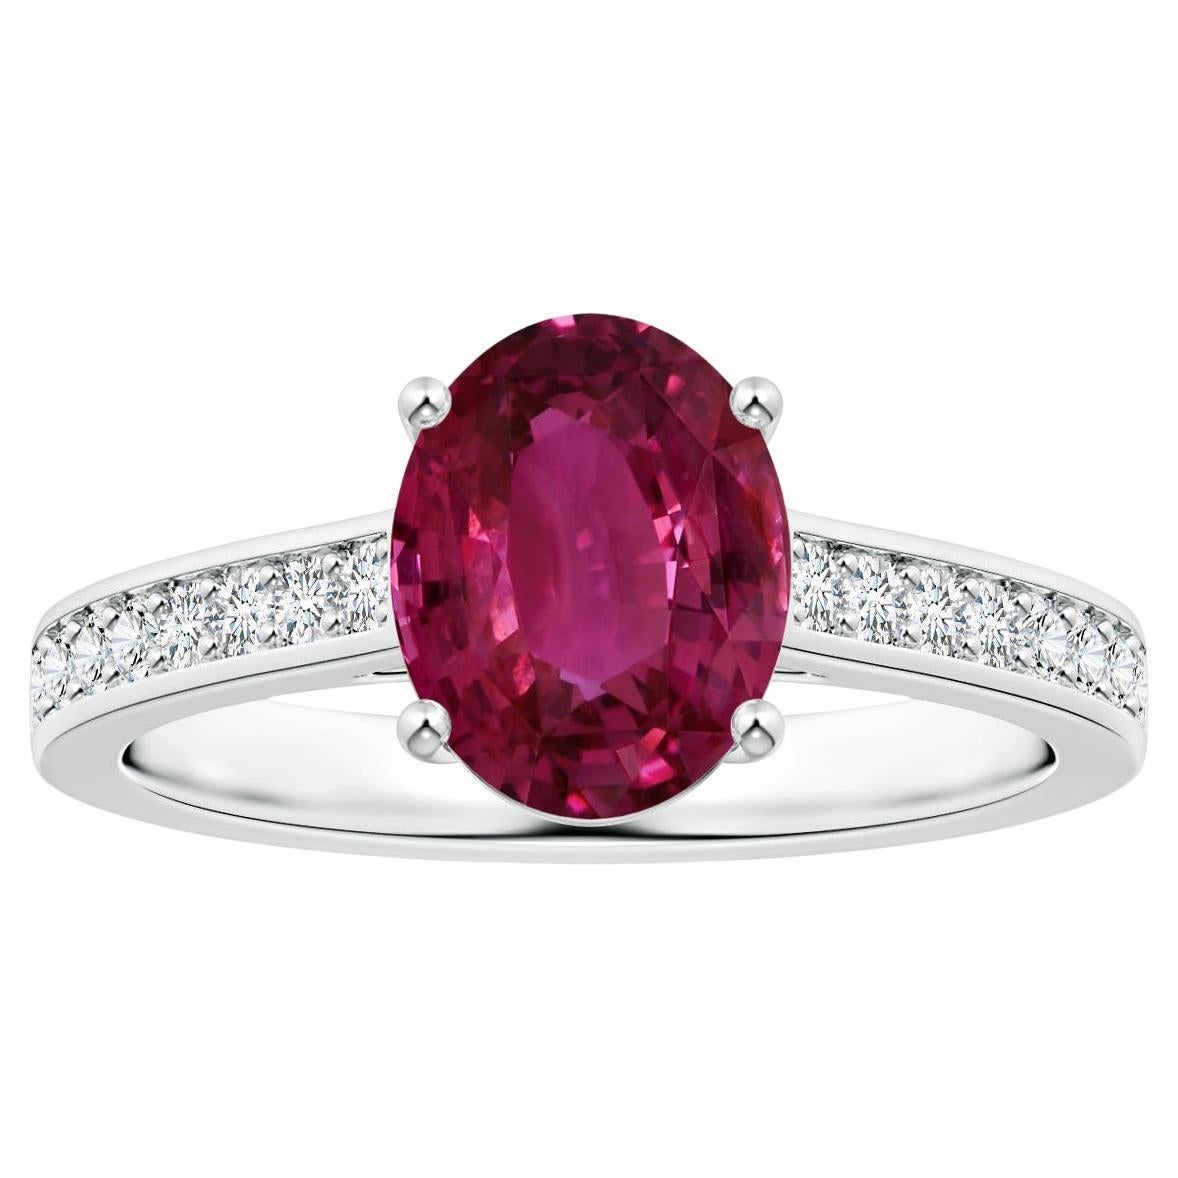 ANGARA Prong-Set GIA Certified Oval Pink Sapphire Ring in Platinum with Diamonds